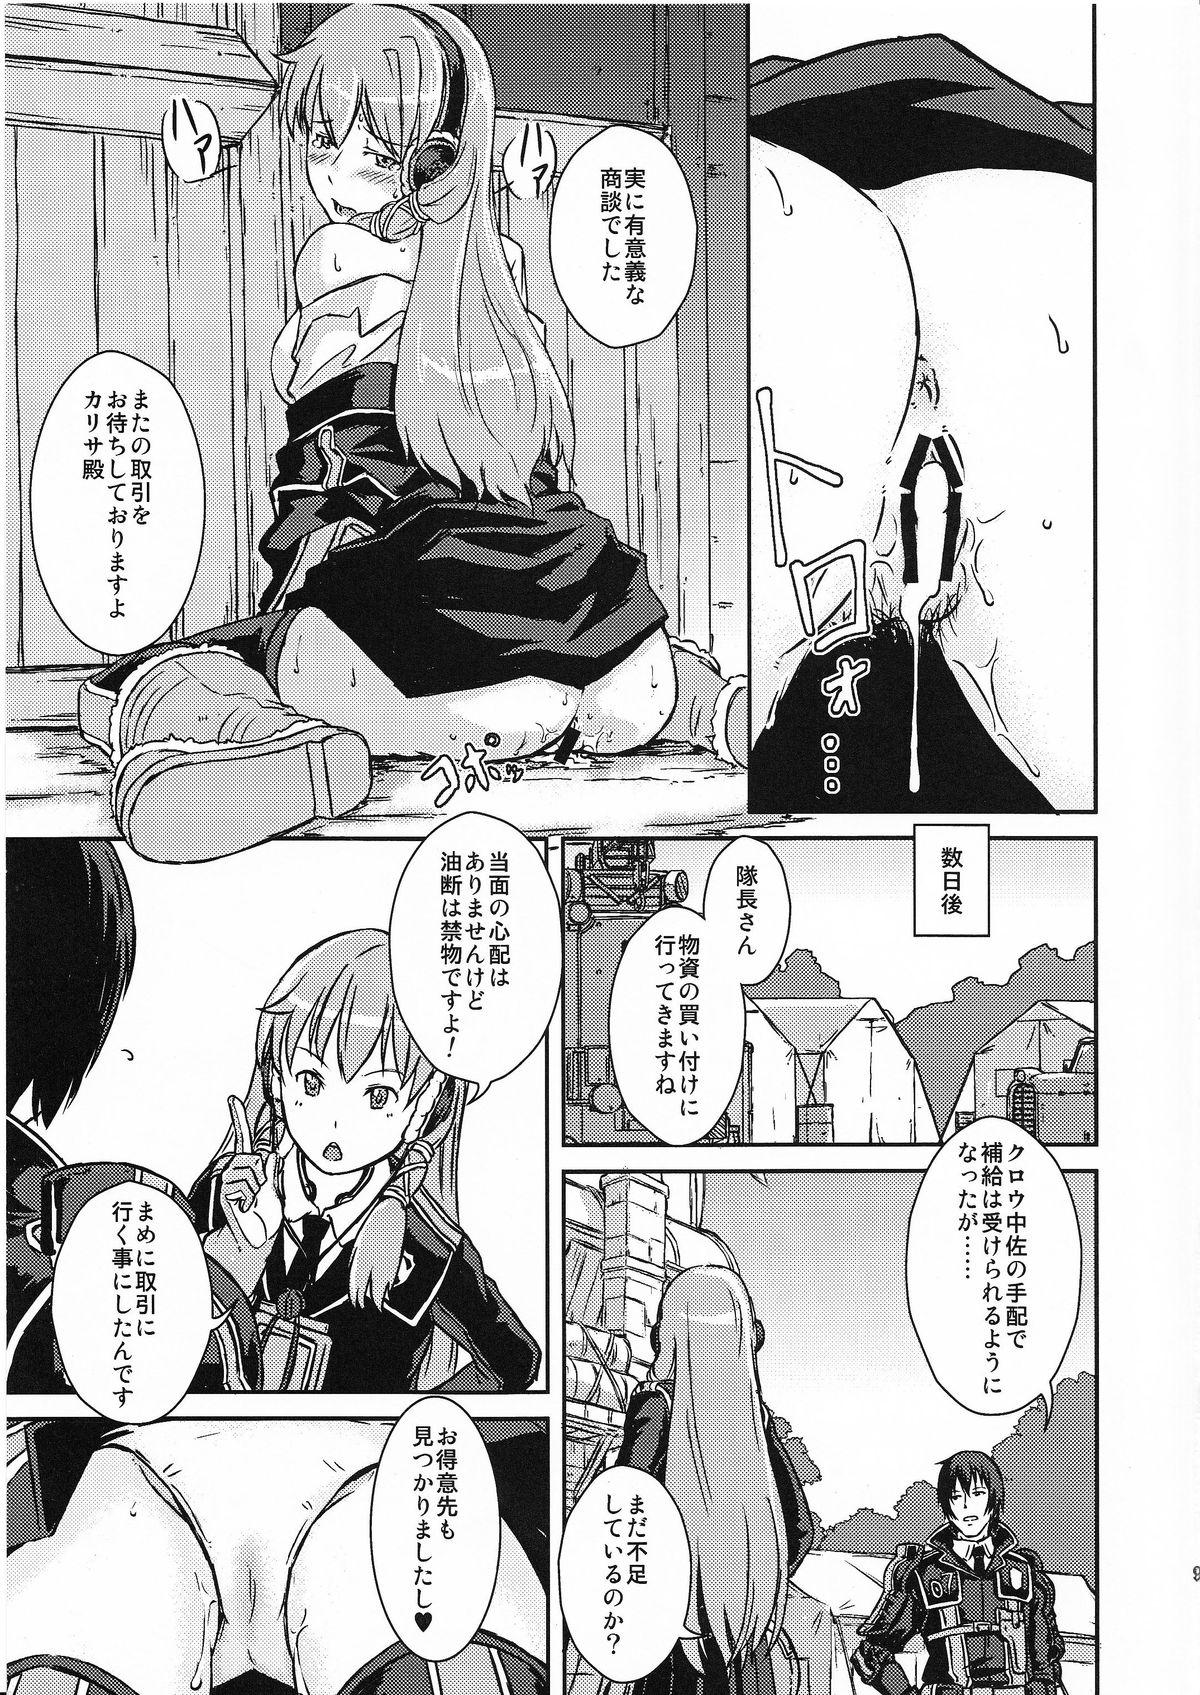 Petite Teen Military Life of Squard 422 NO.2 - Valkyria chronicles Valkyria chronicles 3 Smooth - Page 8